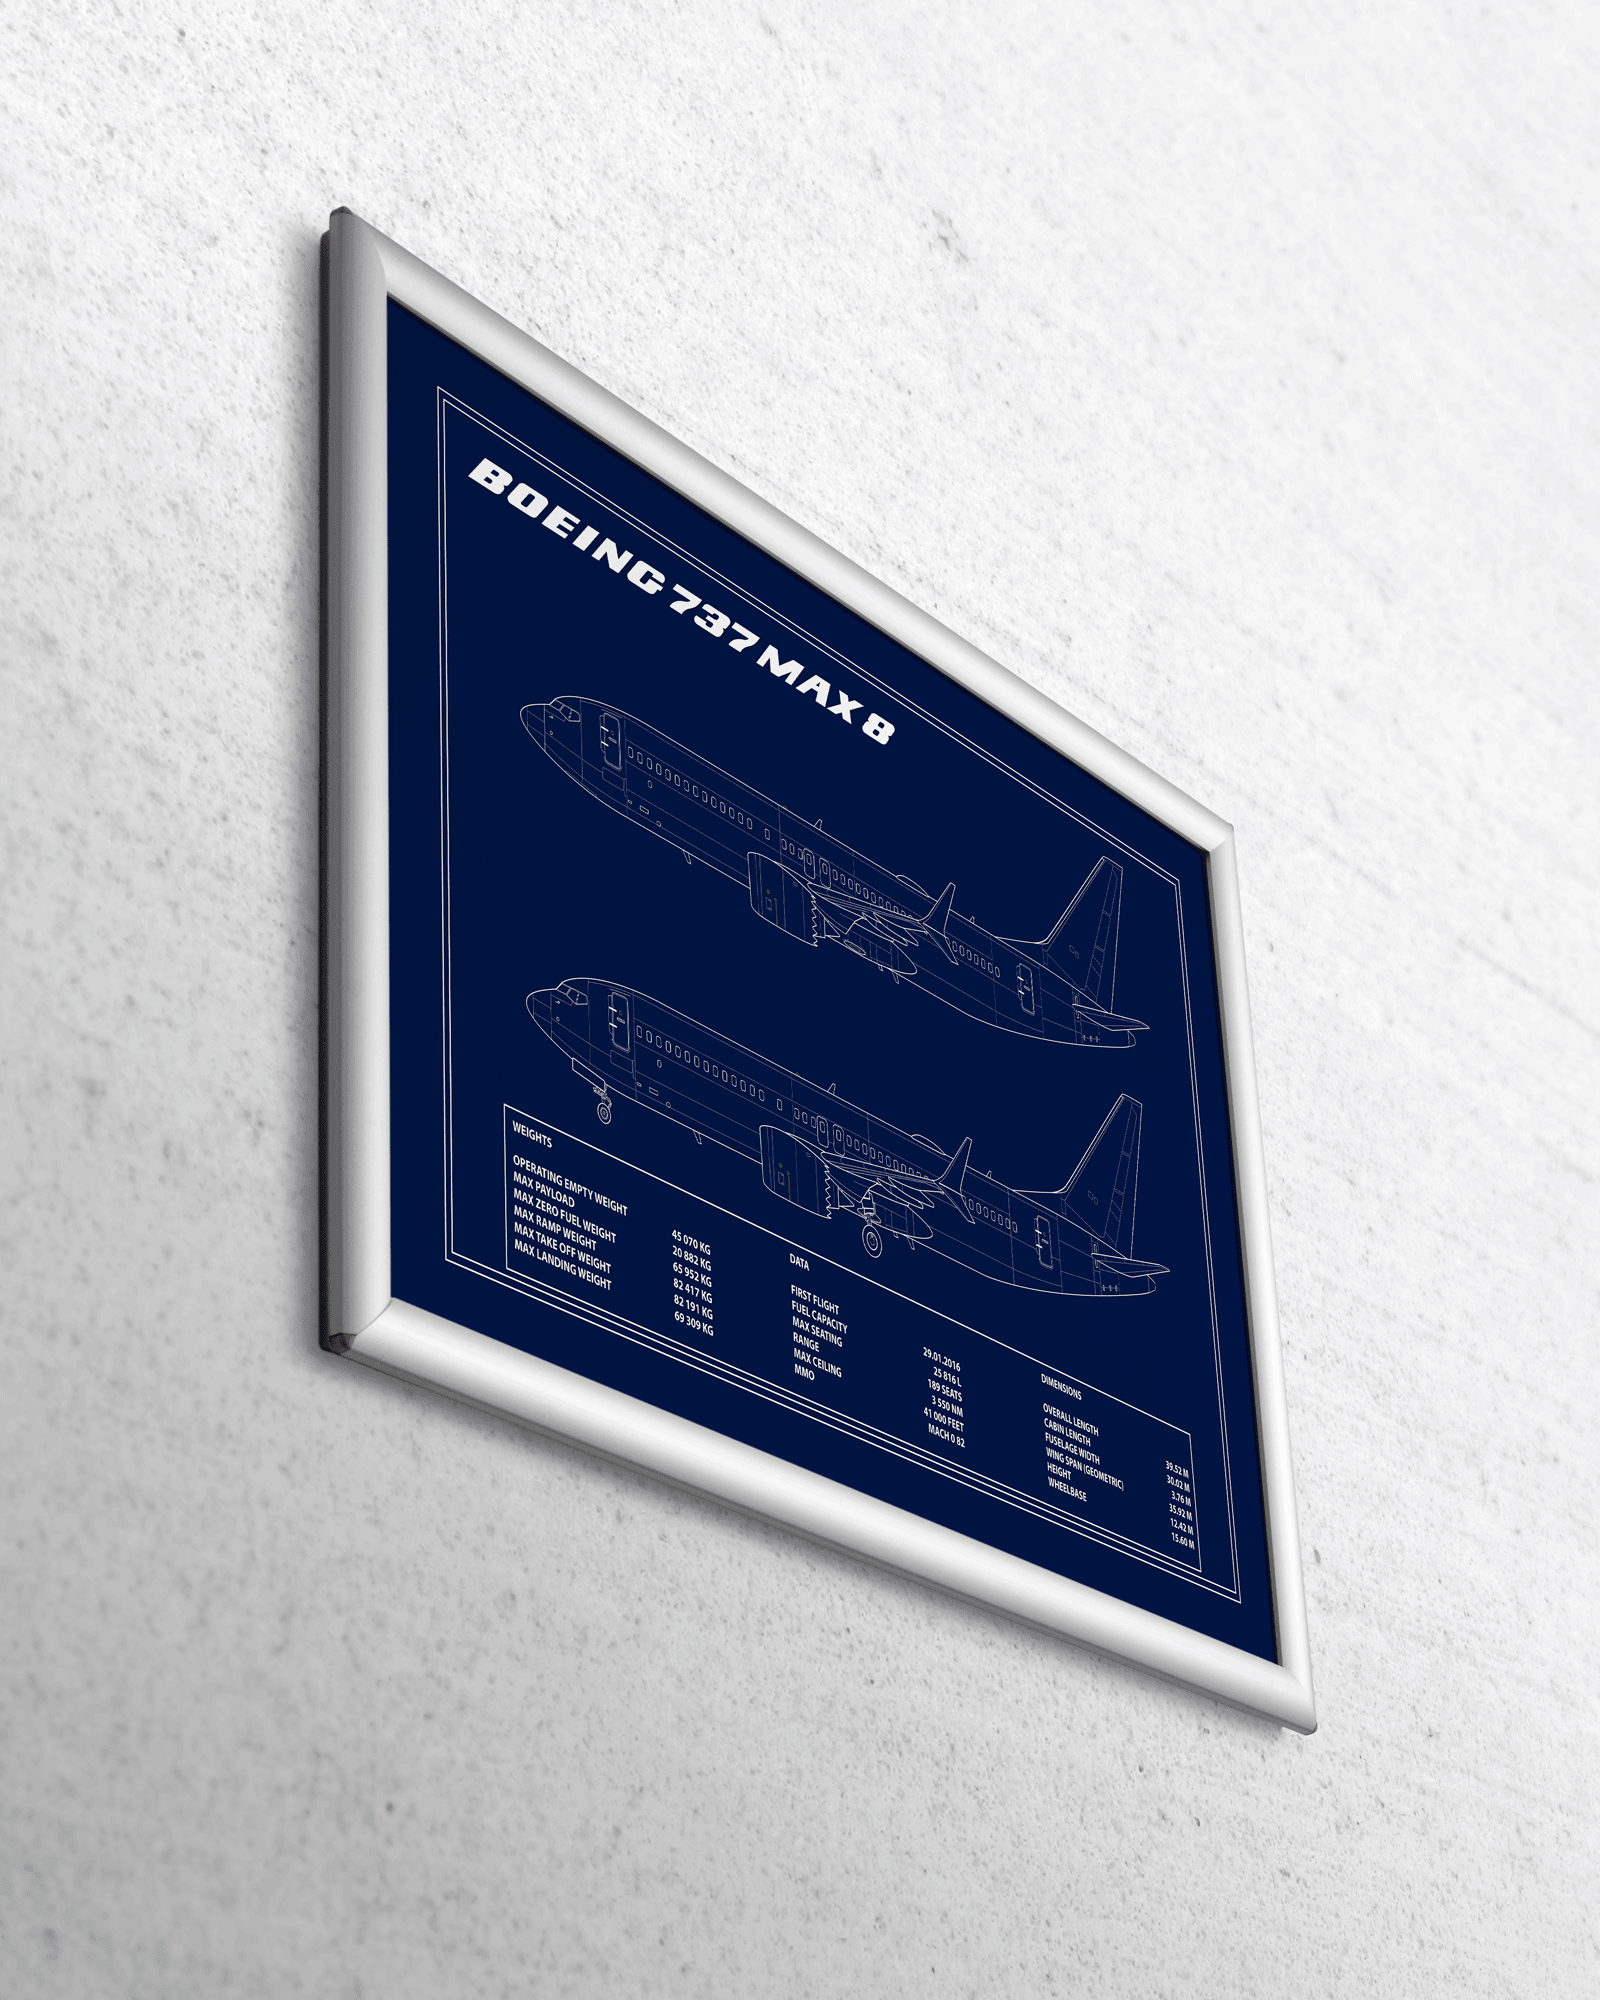 Boeing 737 MAX Blueprint Poster